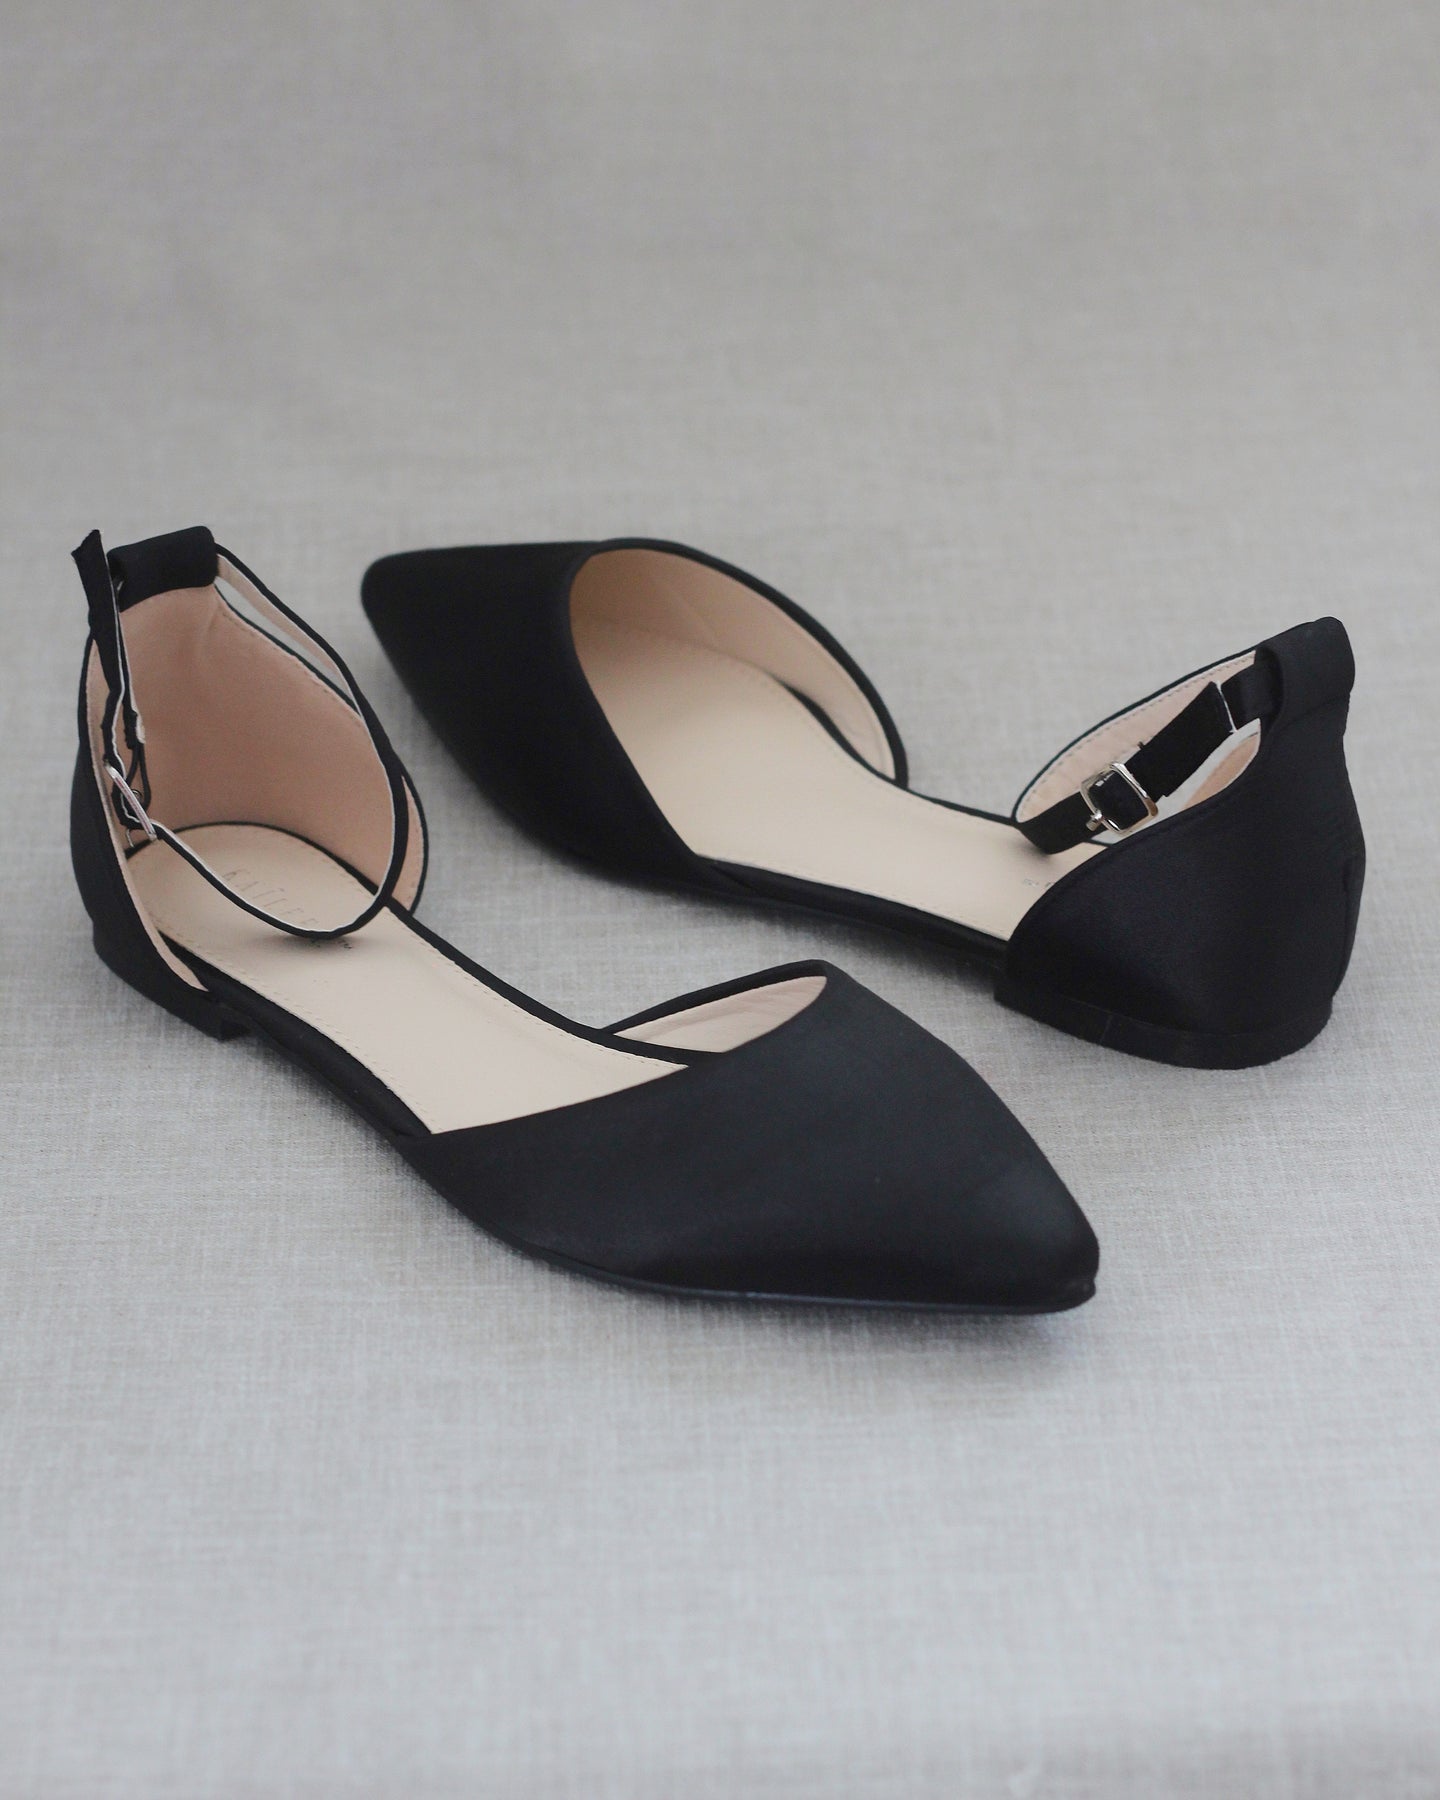 Black Satin Flats with Ankle Strap - Wedding Shoes, Bridesmaids Shoes ...